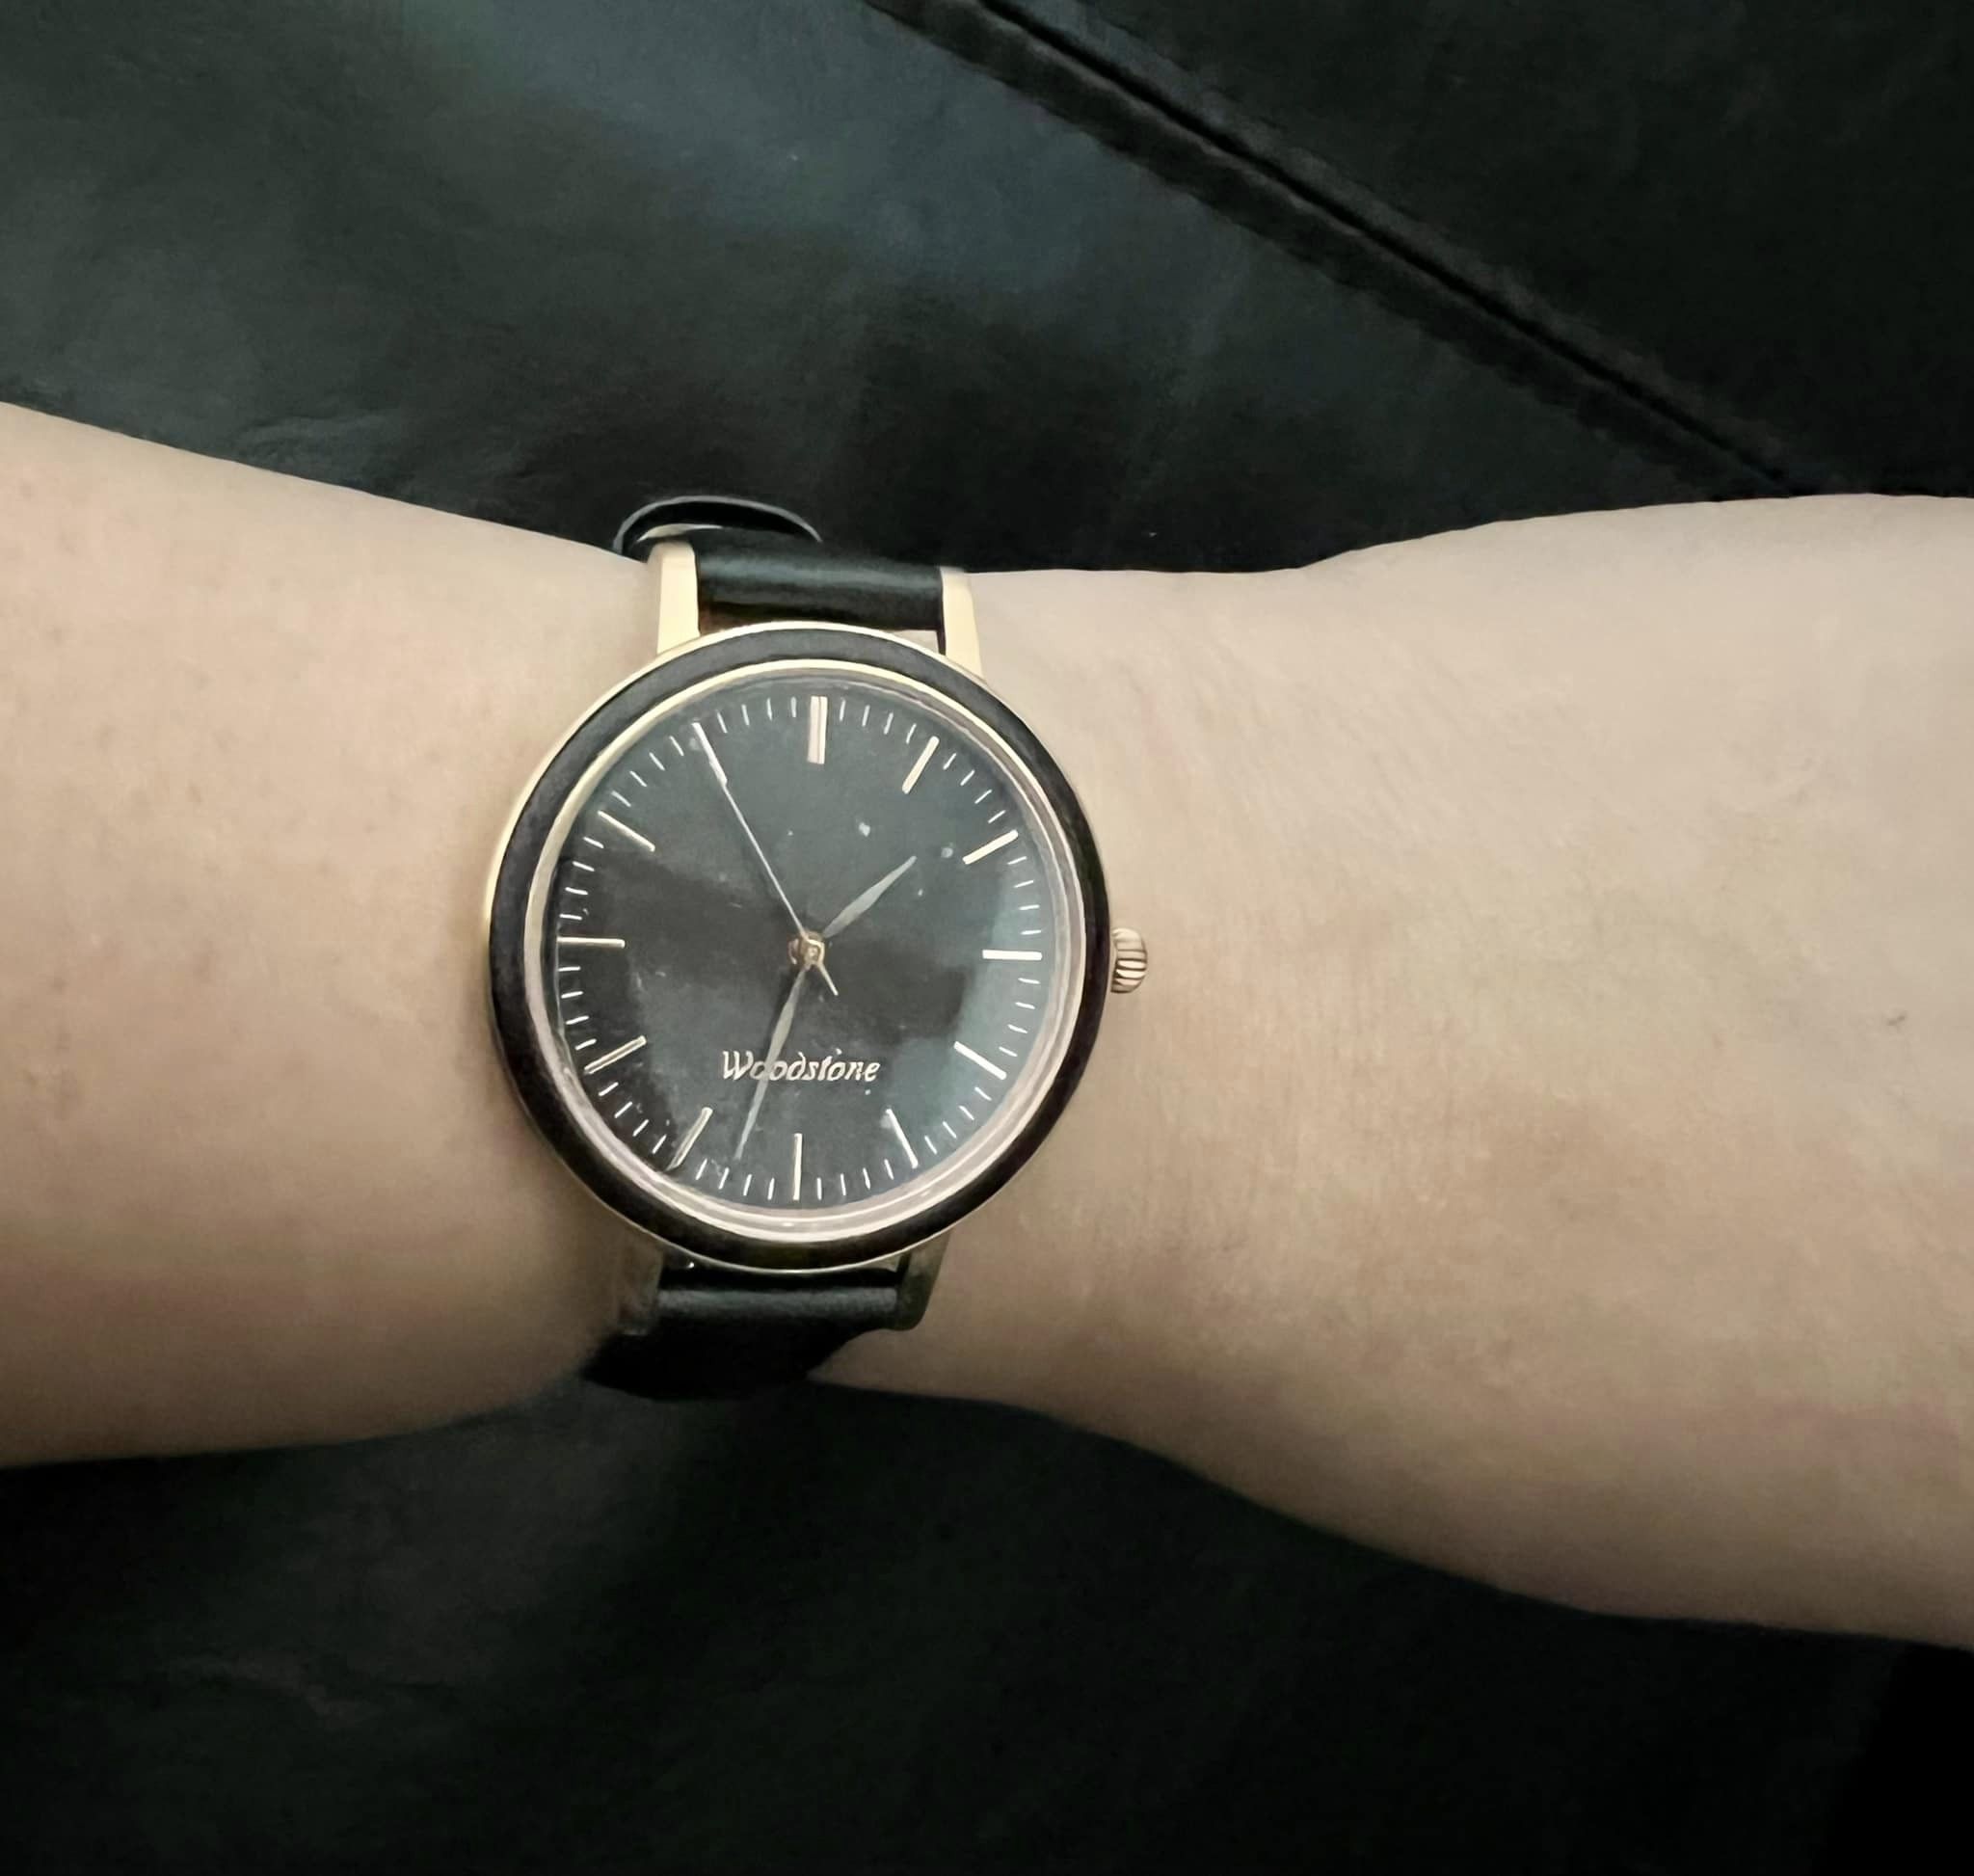 Beautiful Sustainable Watches from Woodstone